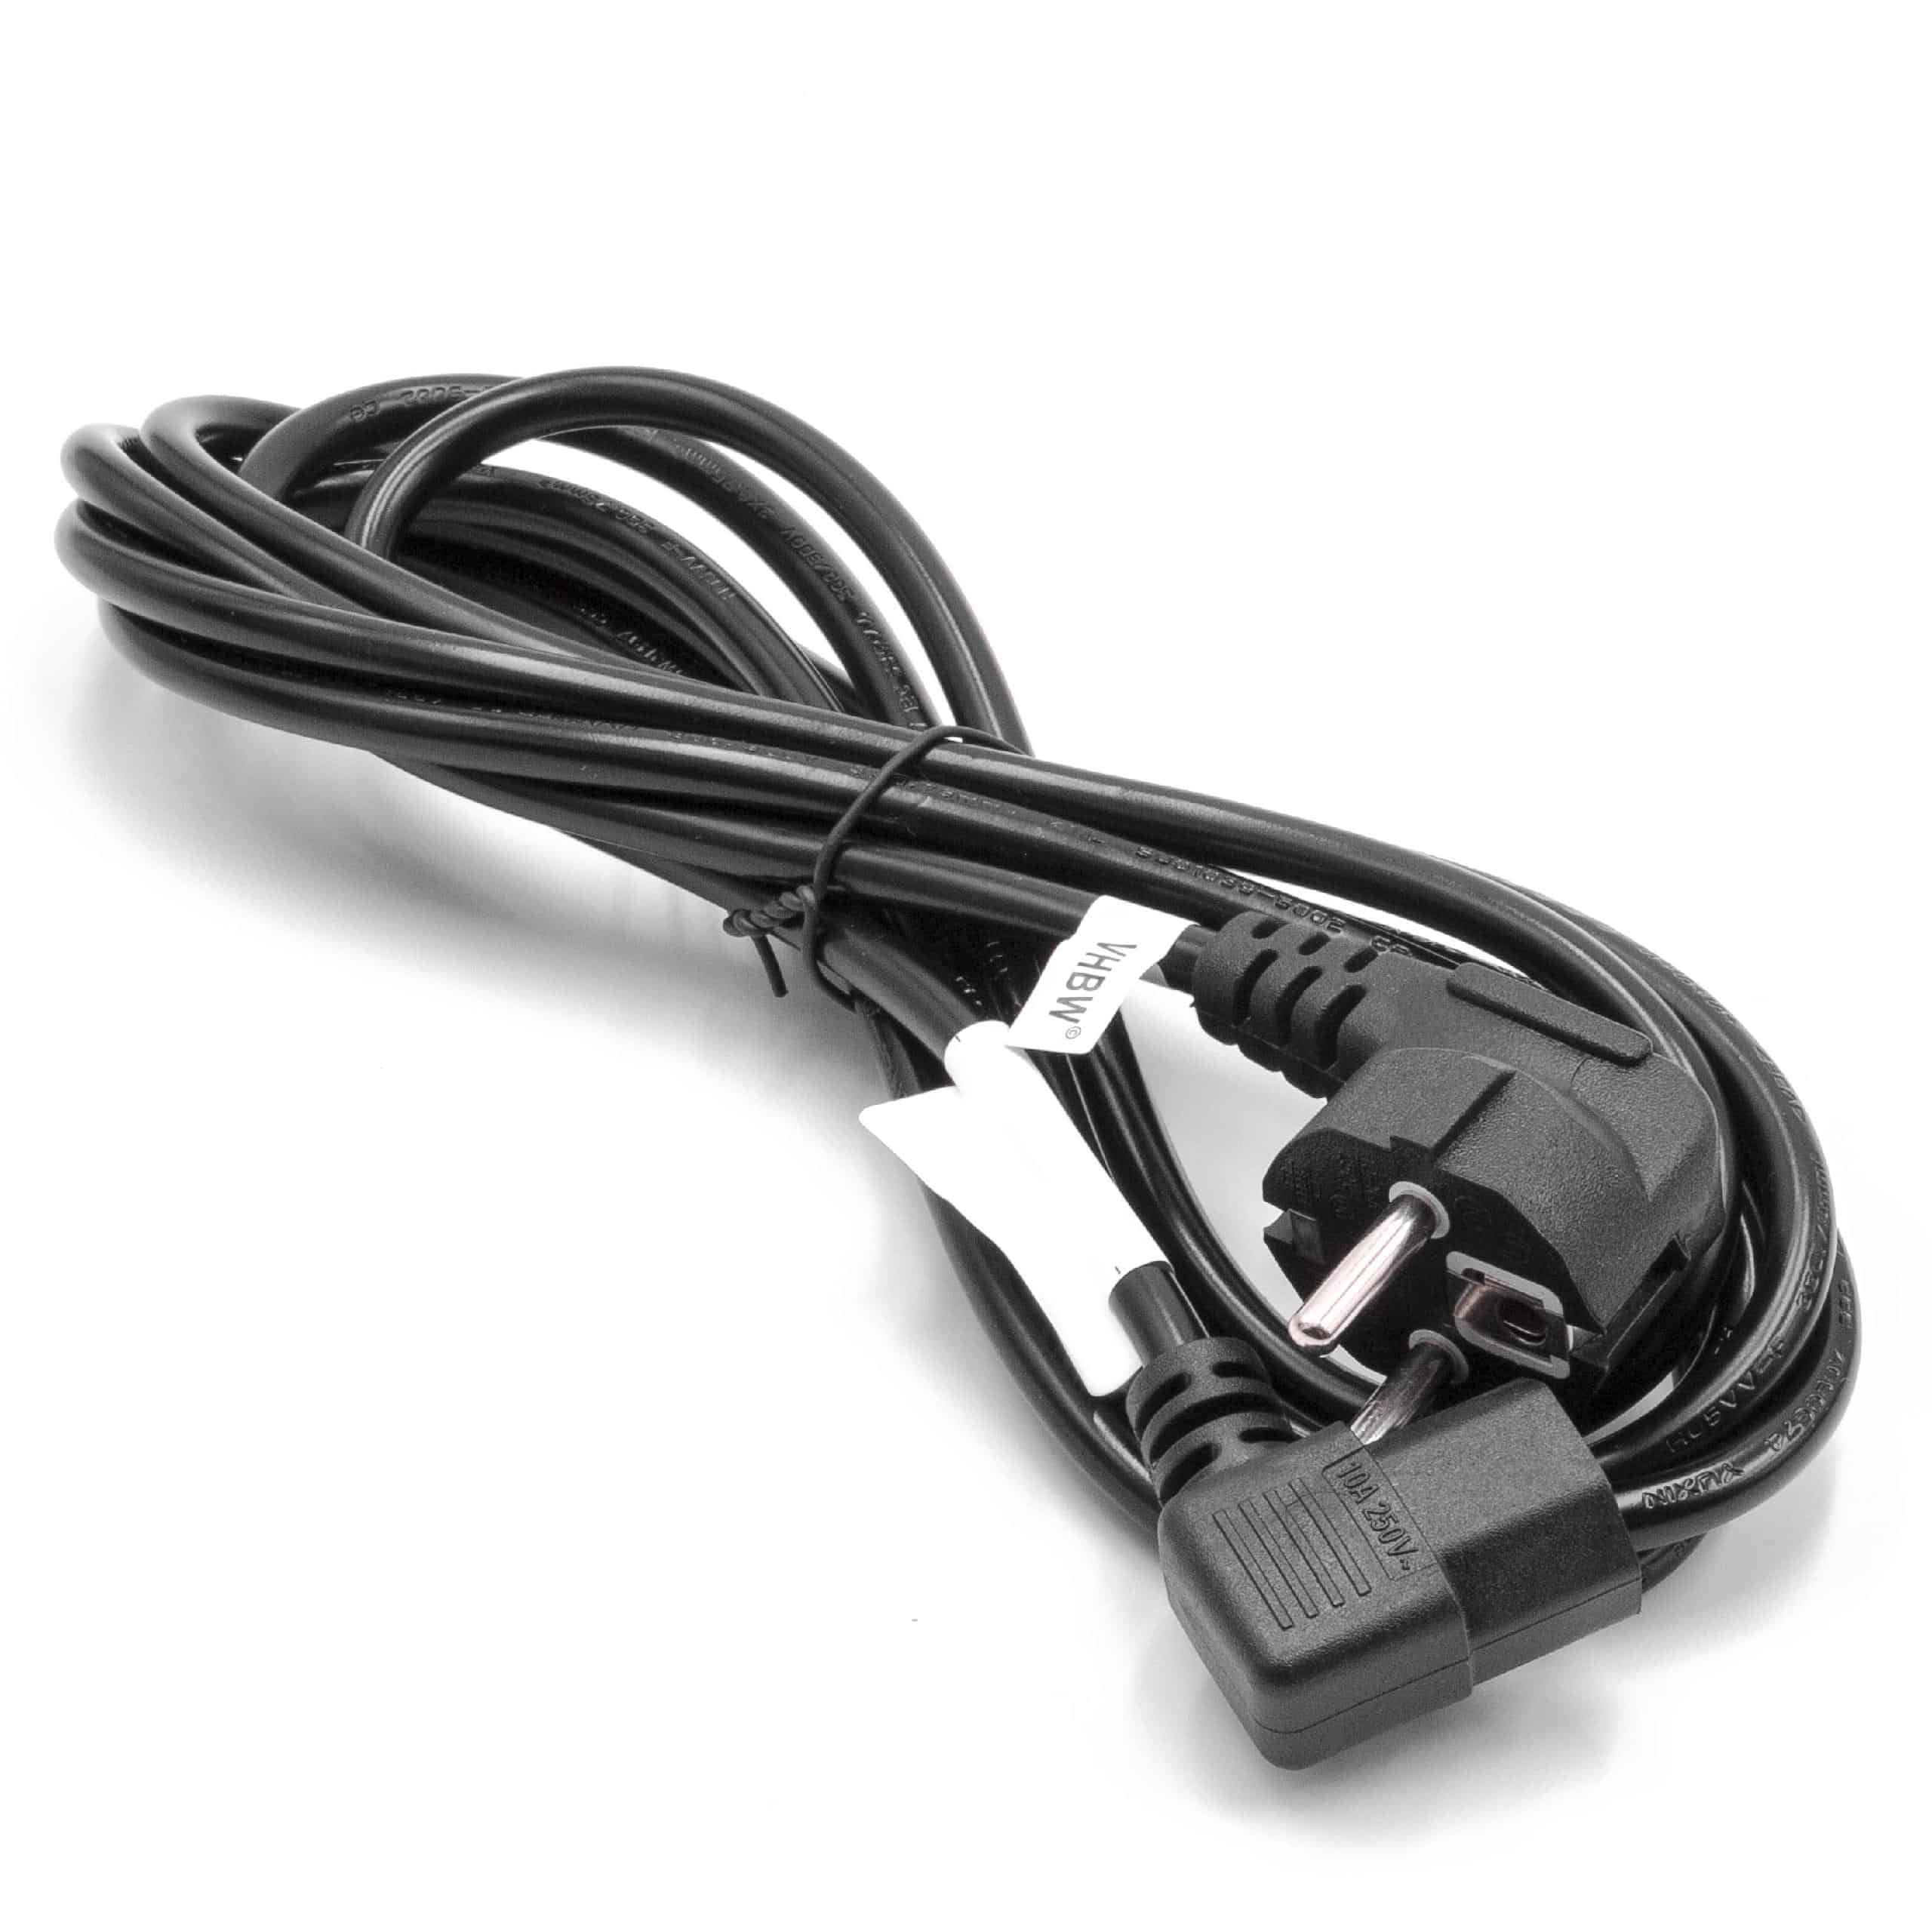 C13 Power Cable Euro Plug suitable for Devices - 3 m, Angled